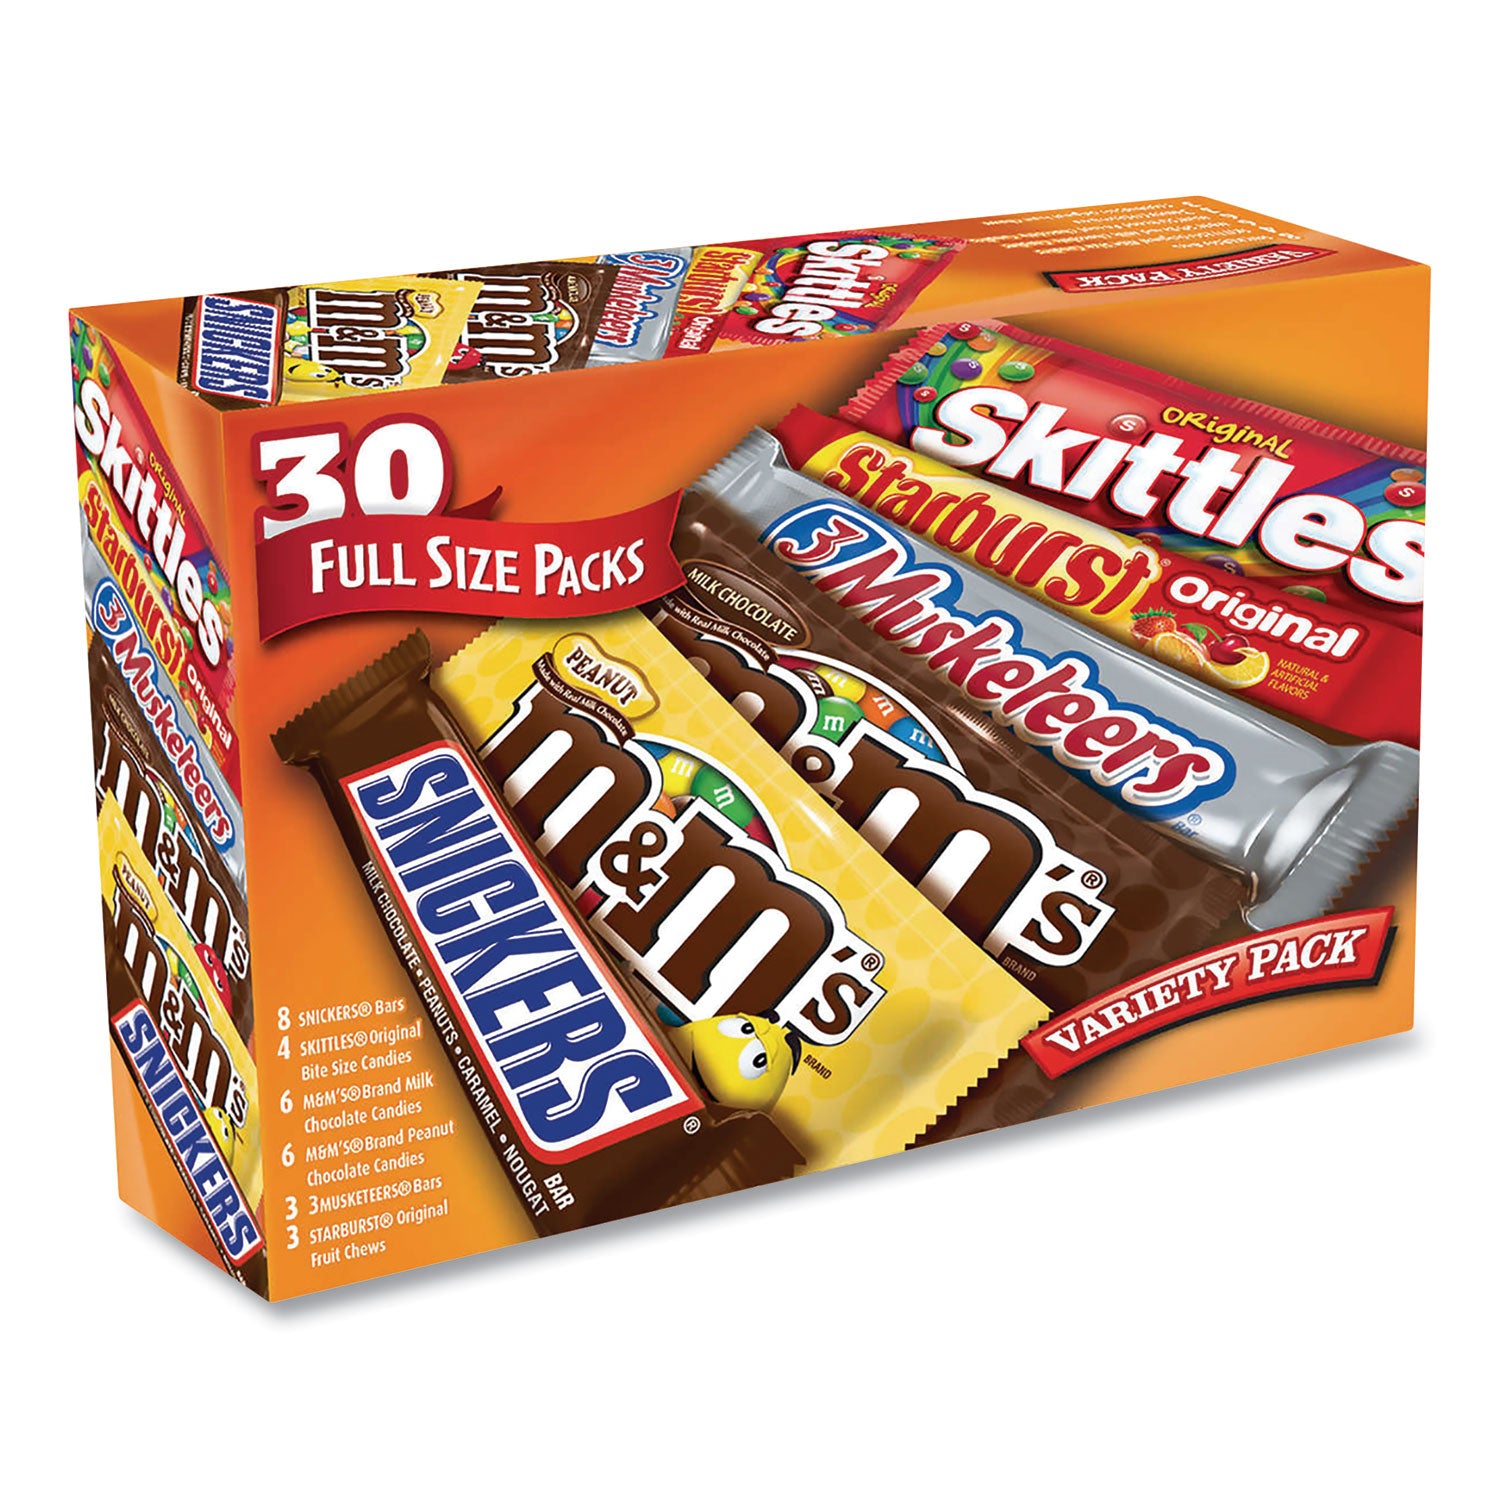 full-size-candy-bars-variety-pack-assorted-30-box-ships-in-1-3-business-days_grr22000084 - 1